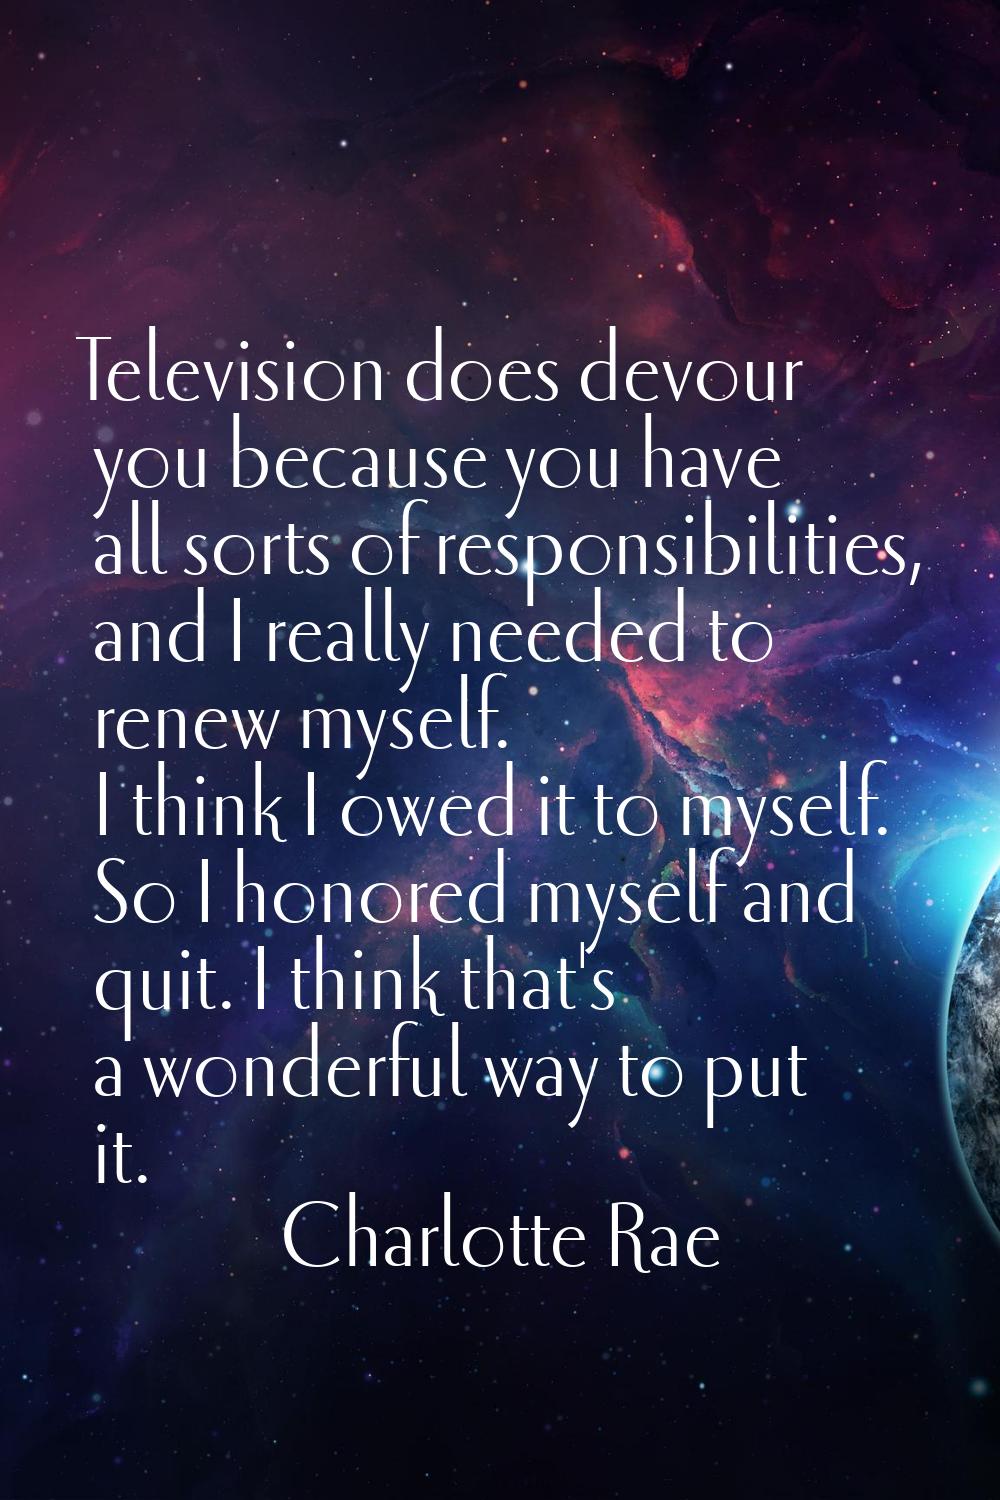 Television does devour you because you have all sorts of responsibilities, and I really needed to r